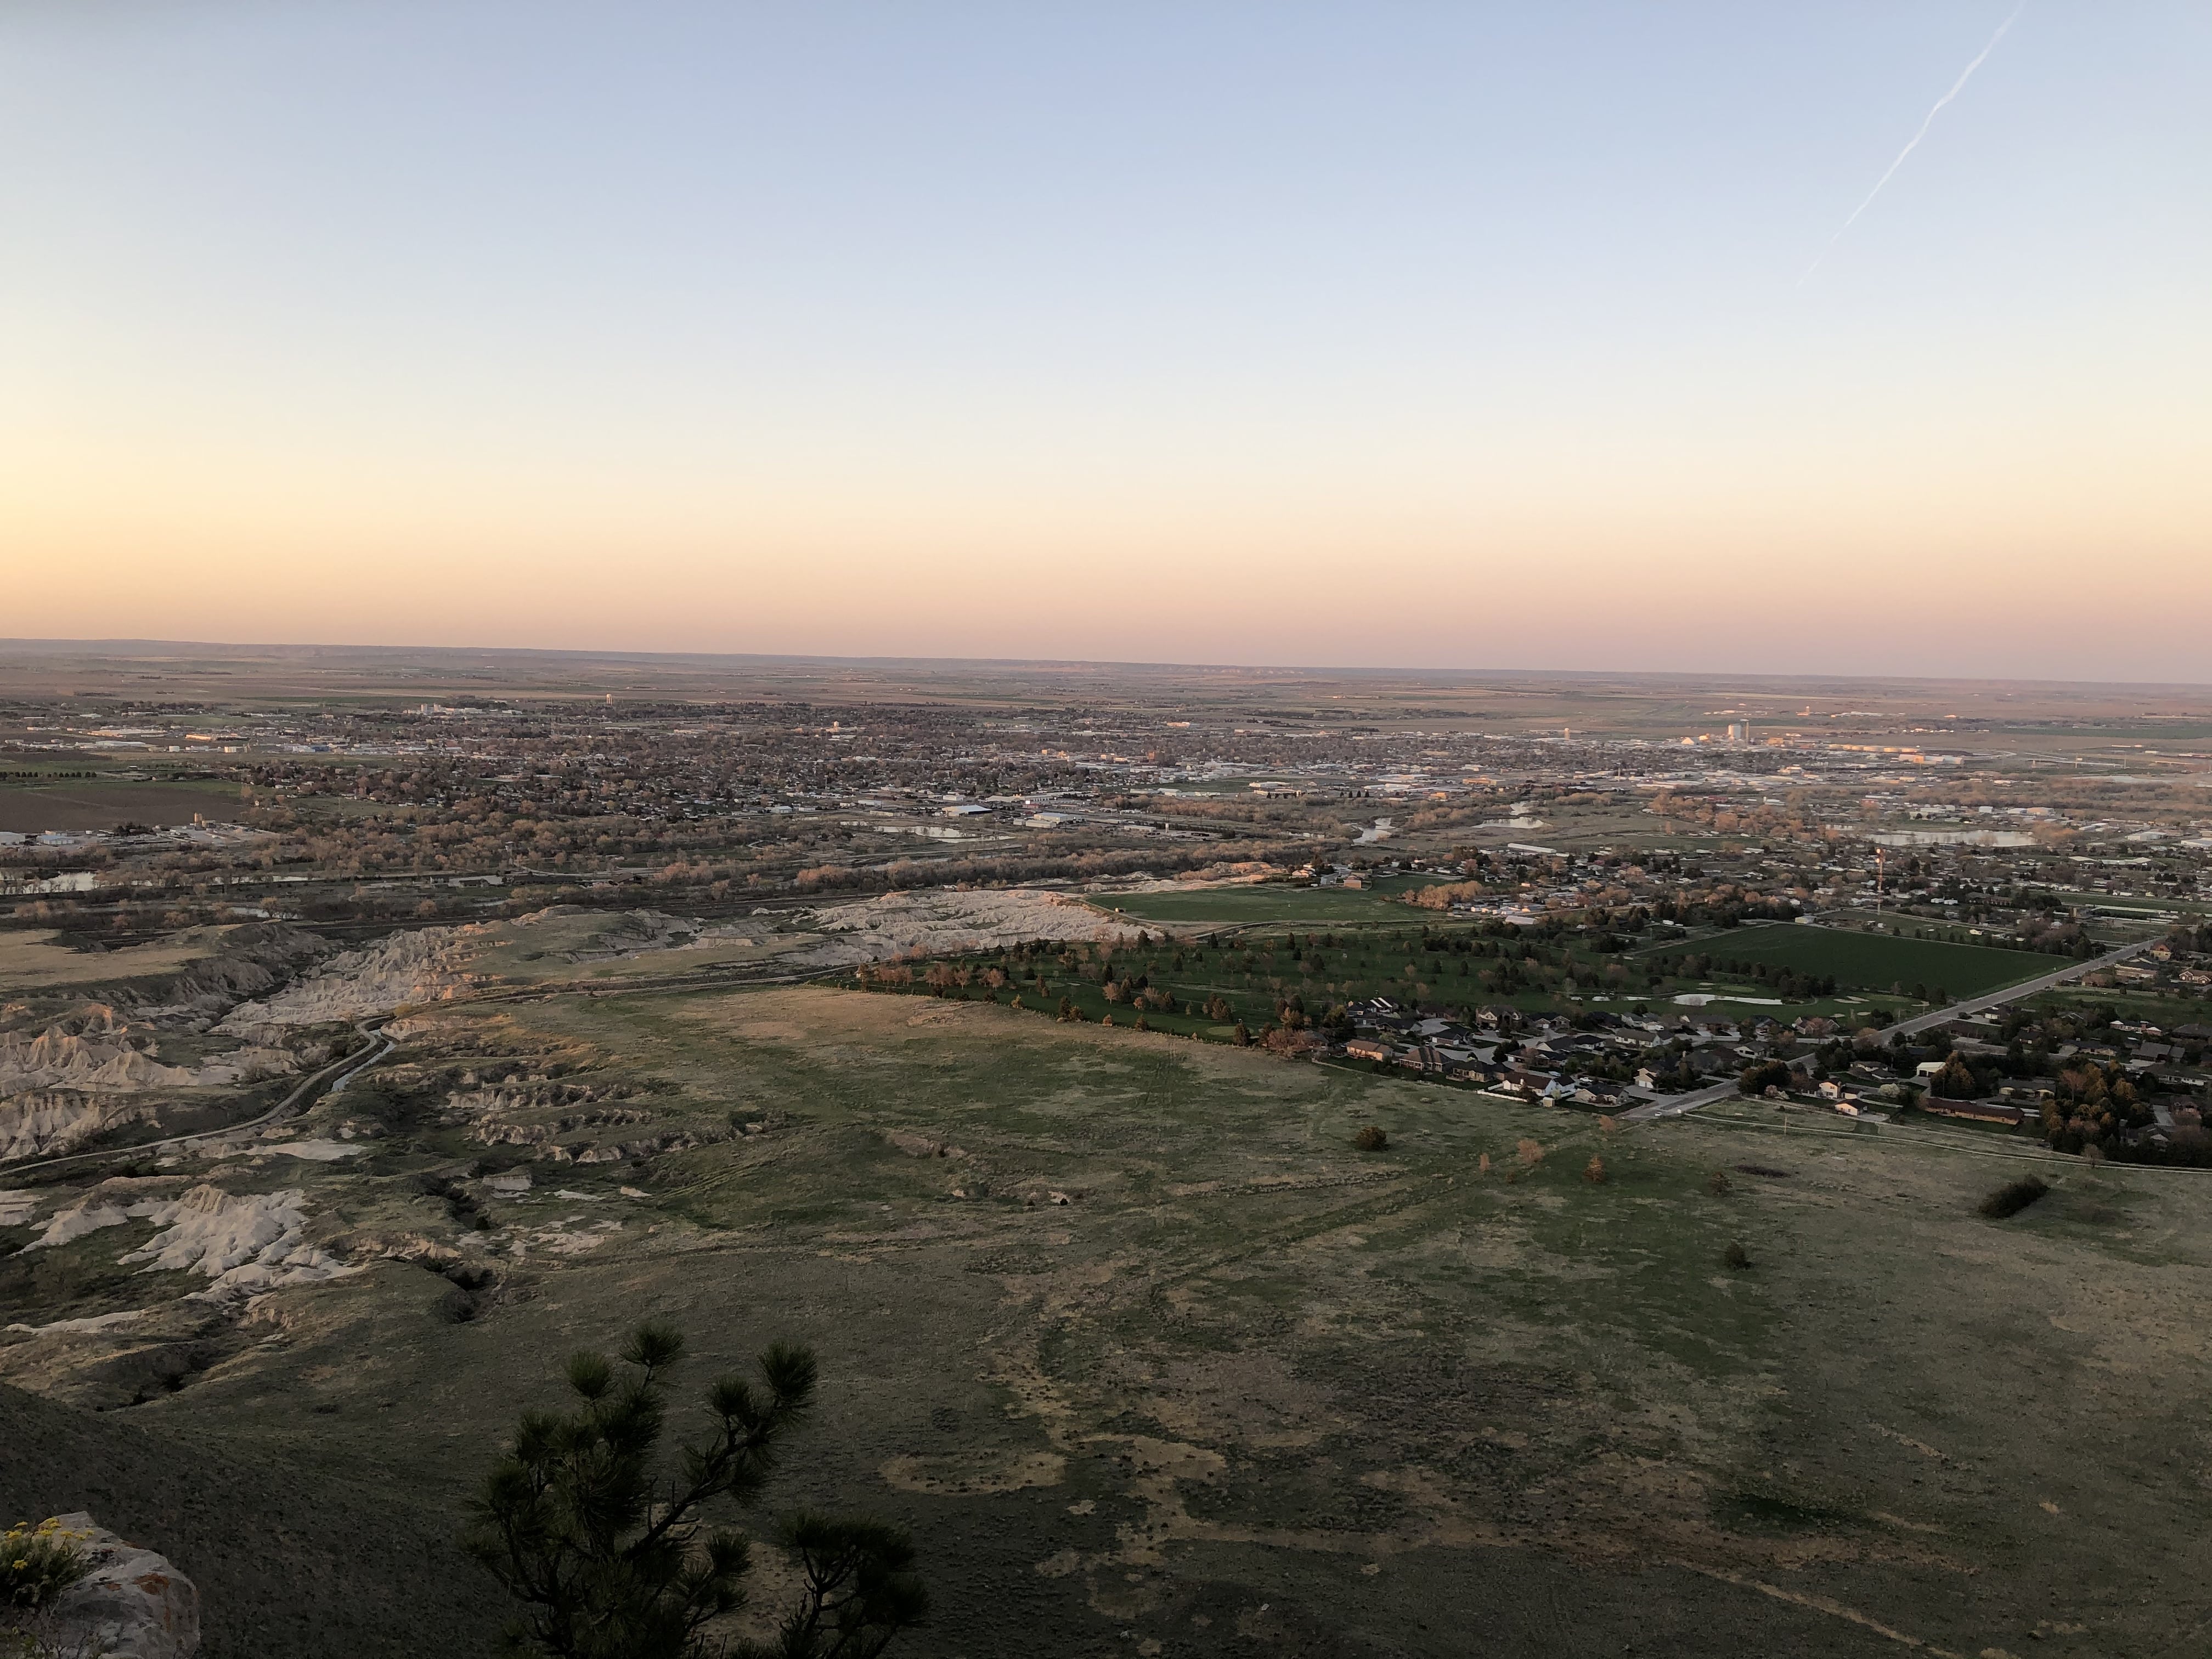 View of Scottsbluff, NE from the Saddle Rock Trail